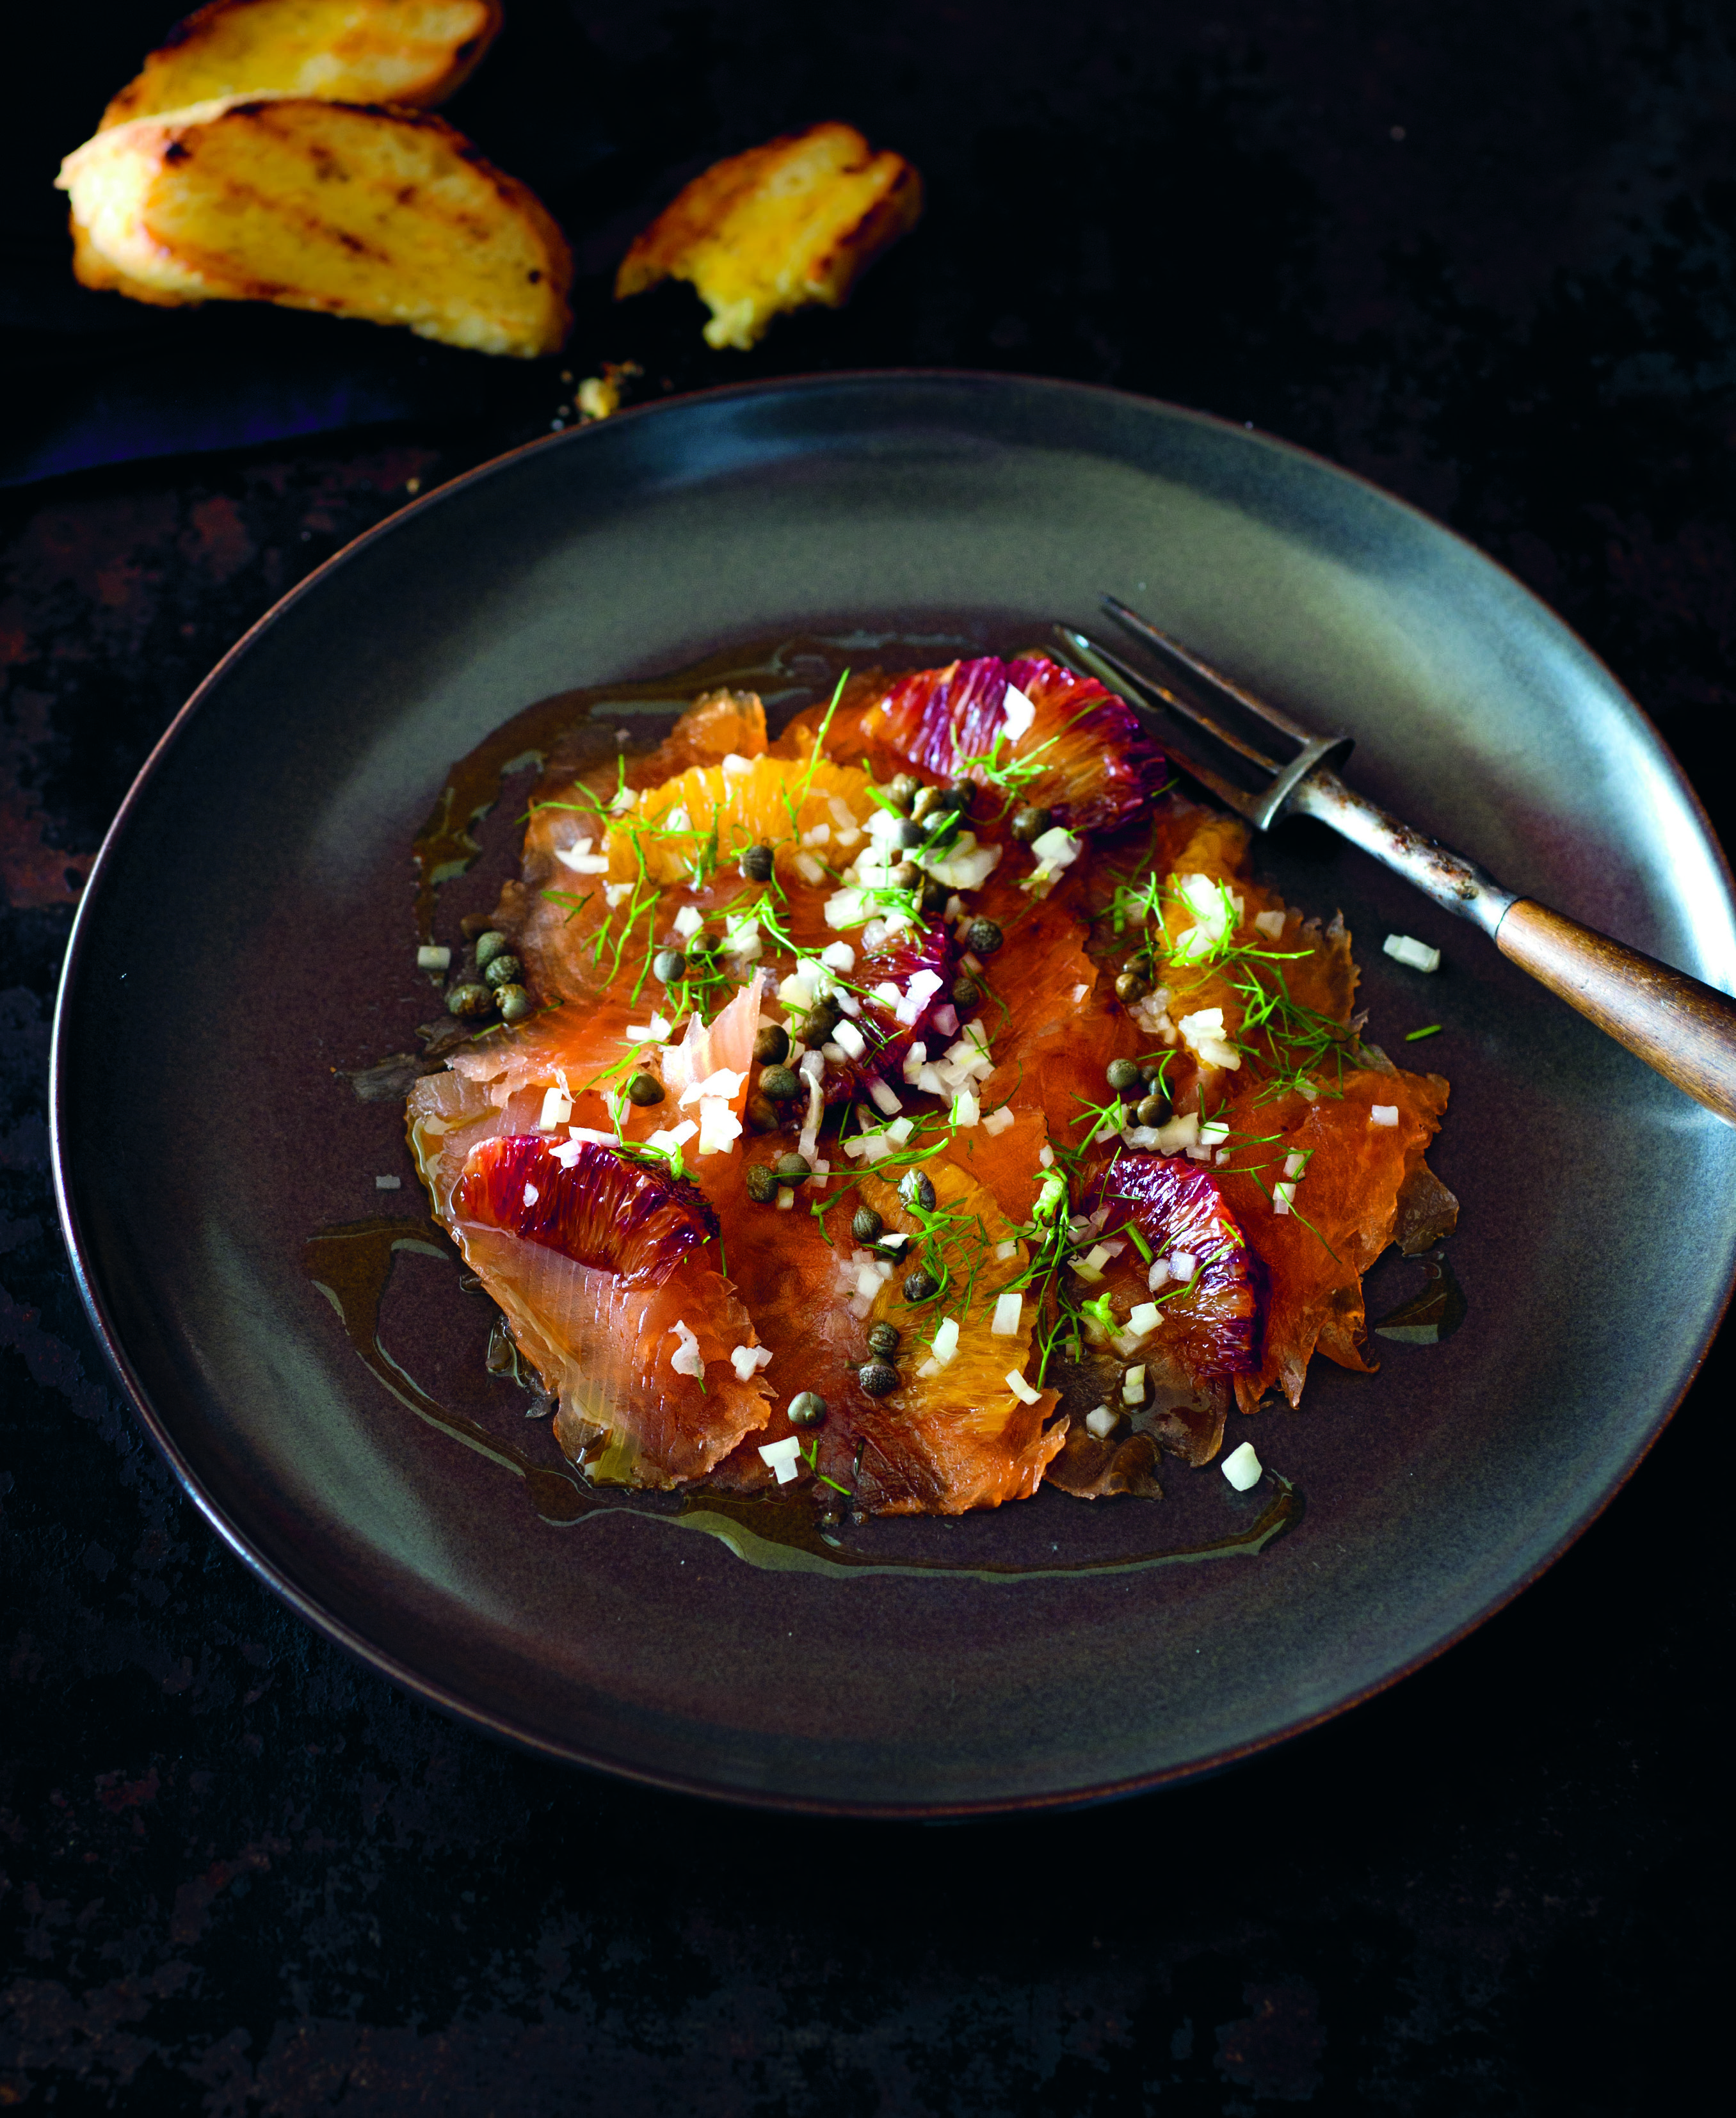 Cured rainbow trout with citrus horseradish and wild fennel